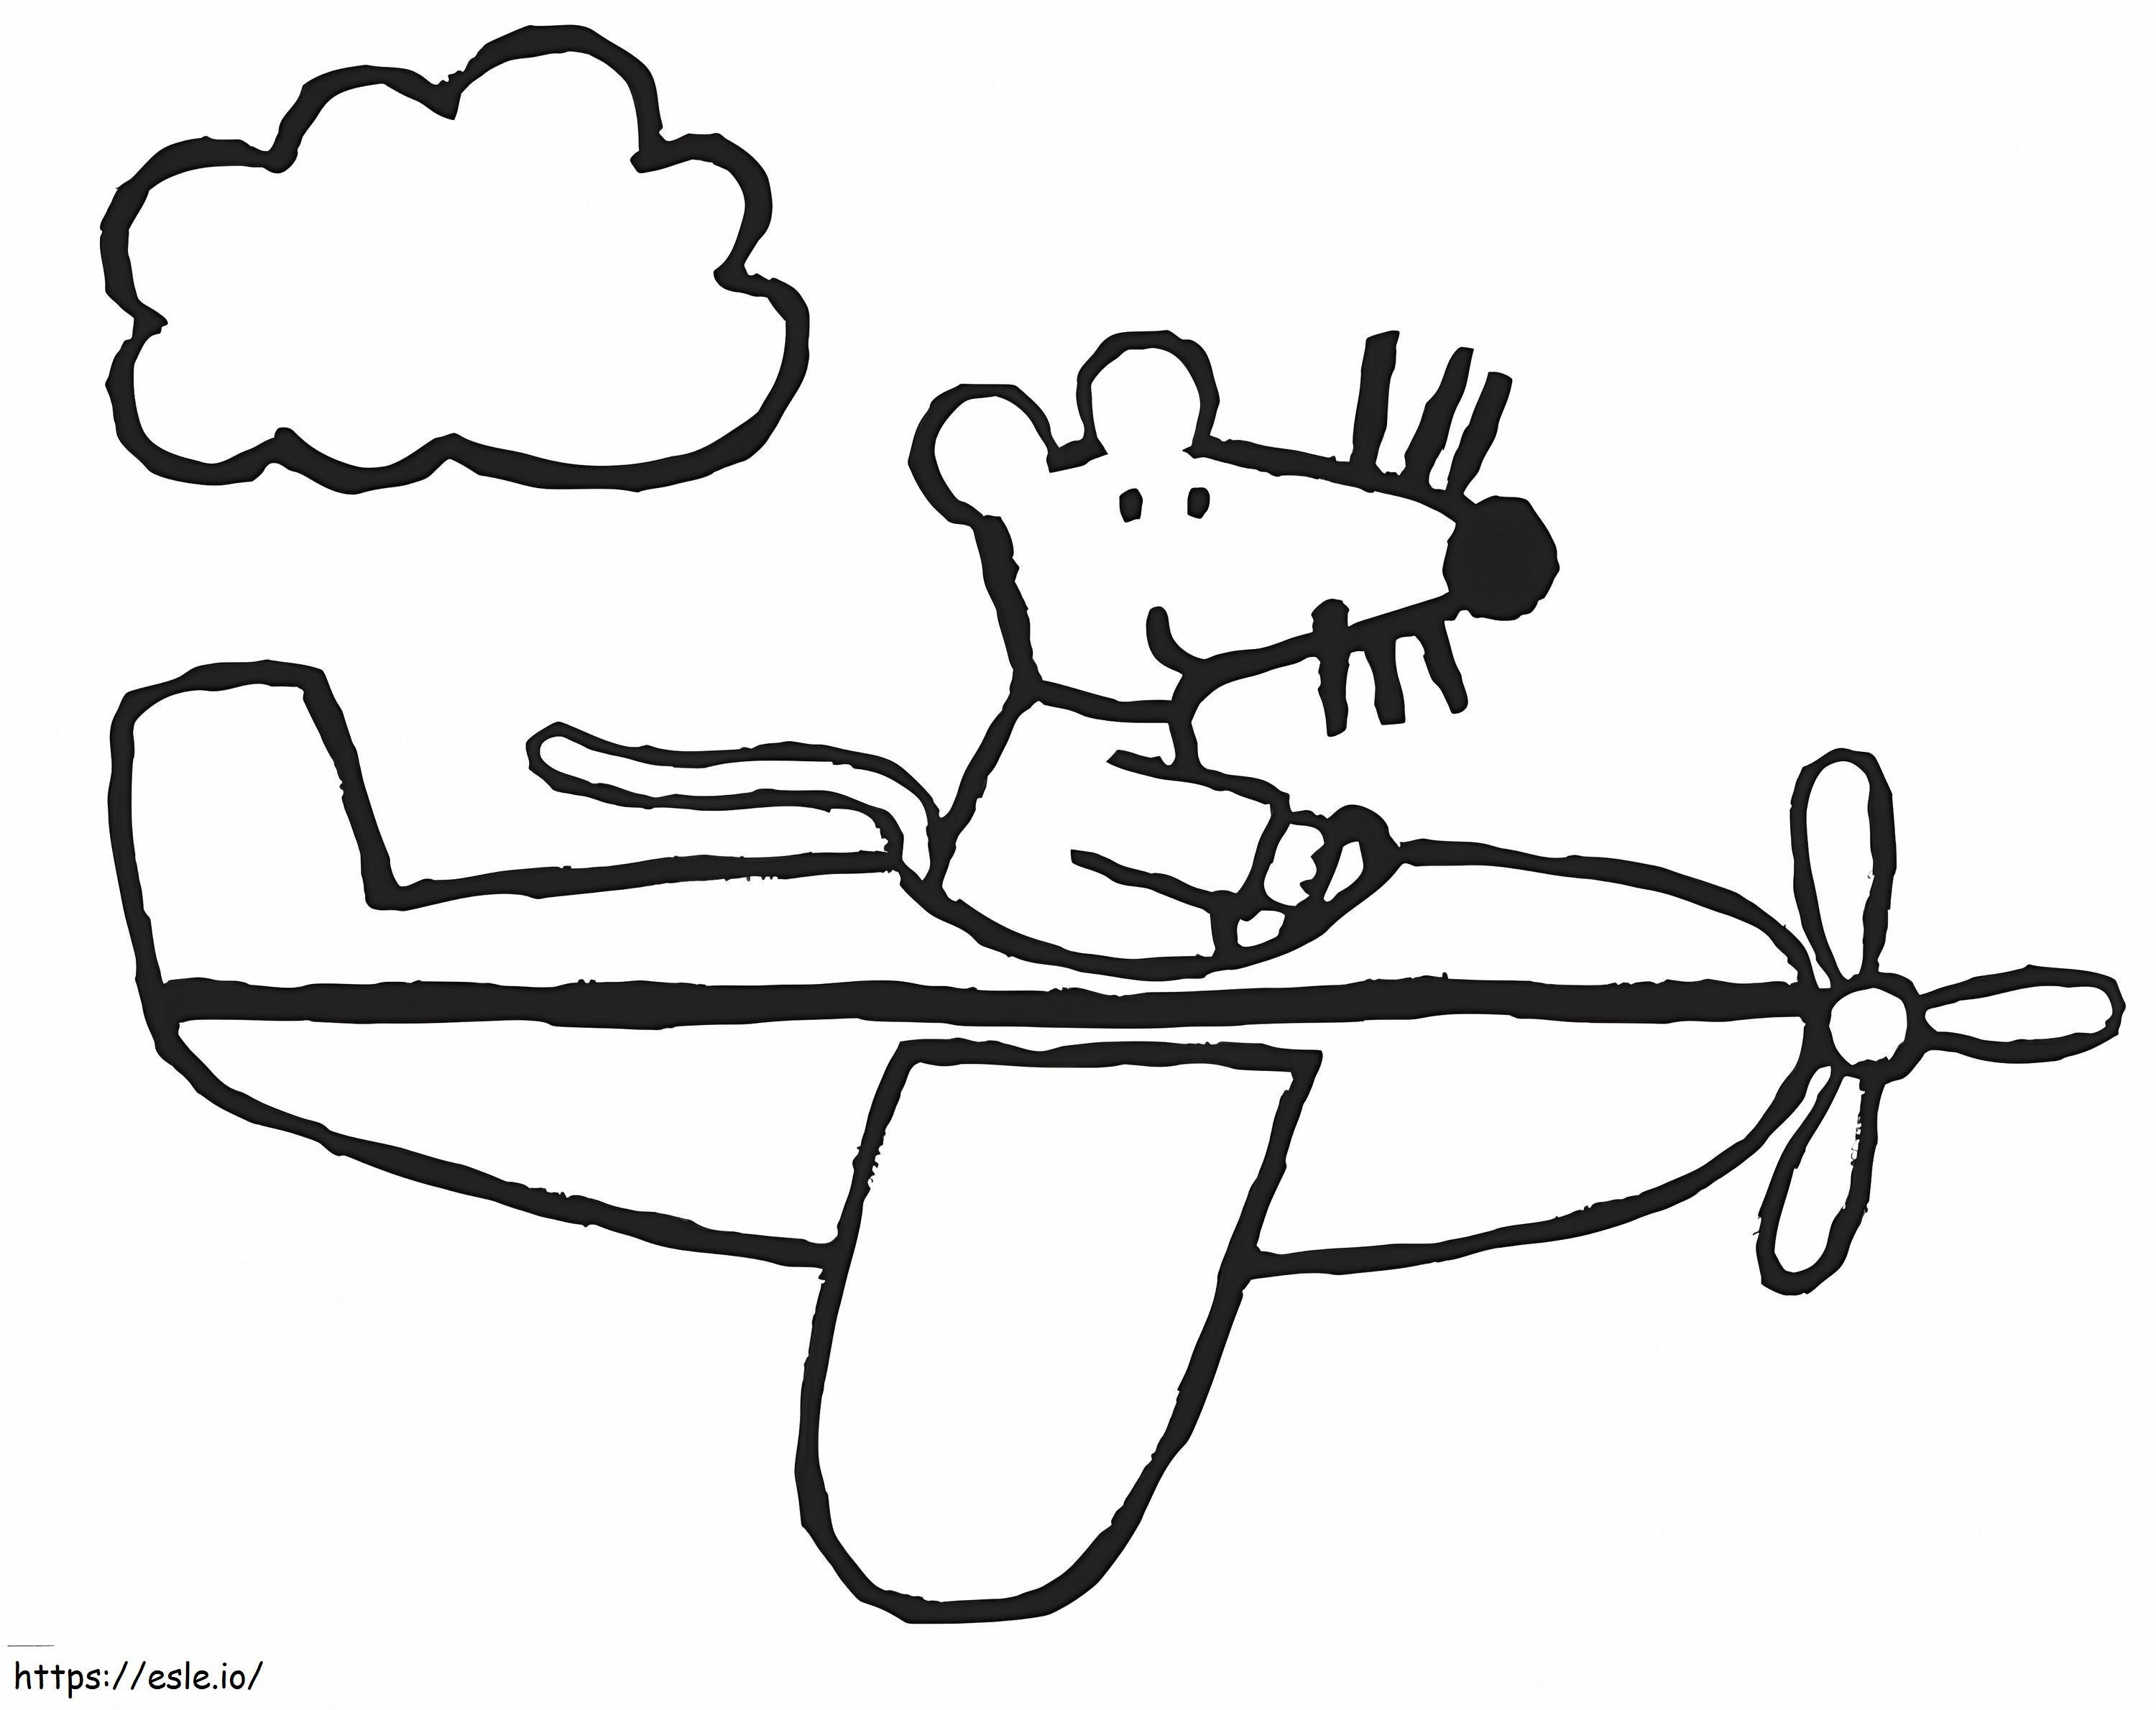 Maisy On Plane coloring page